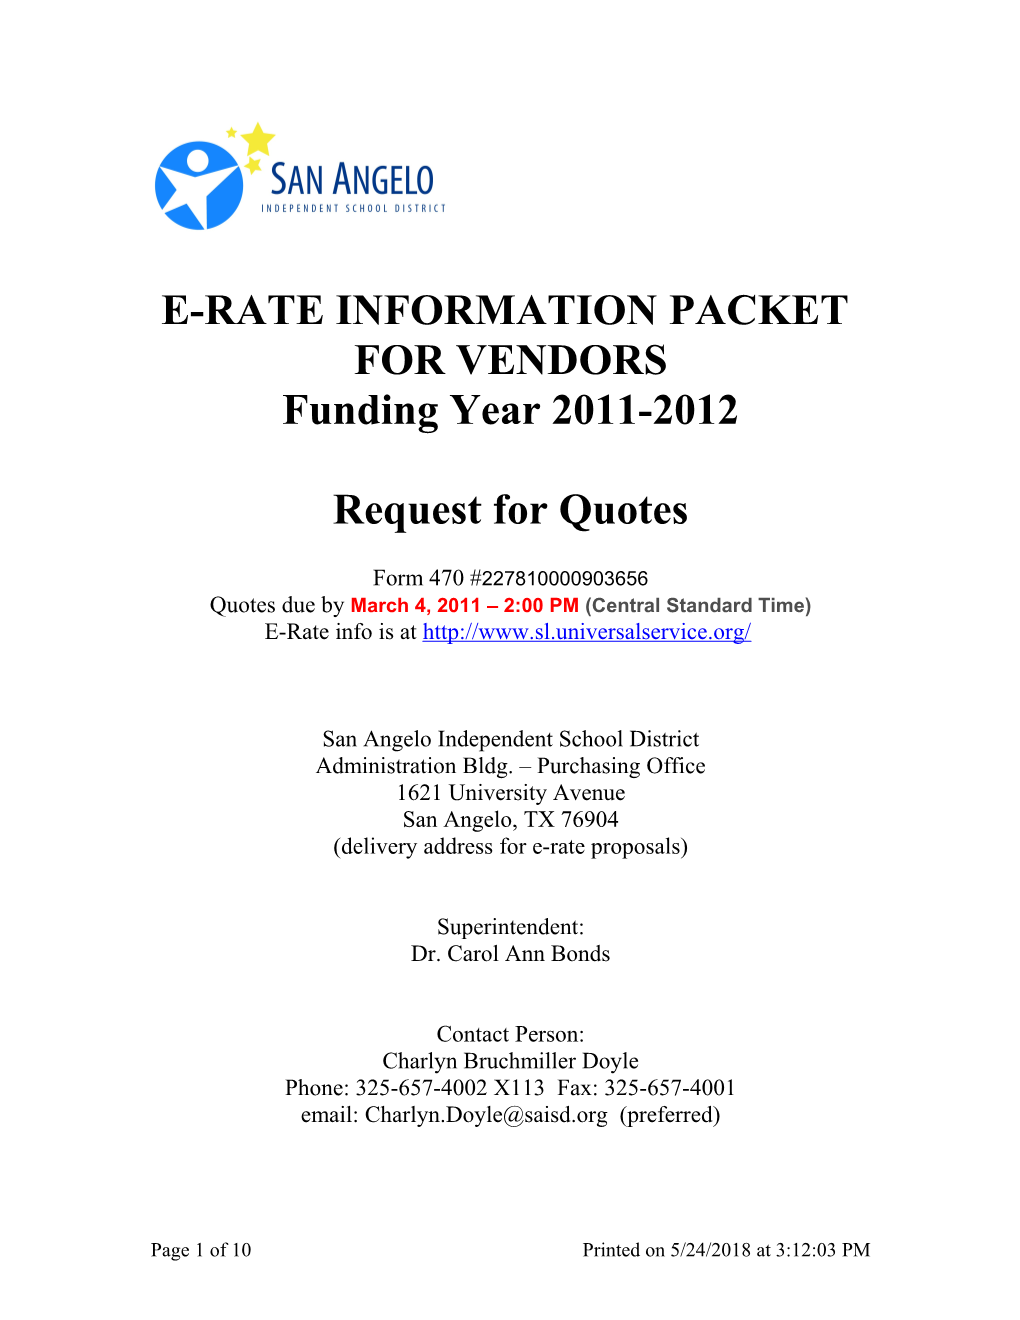 E-Rate Information Packet